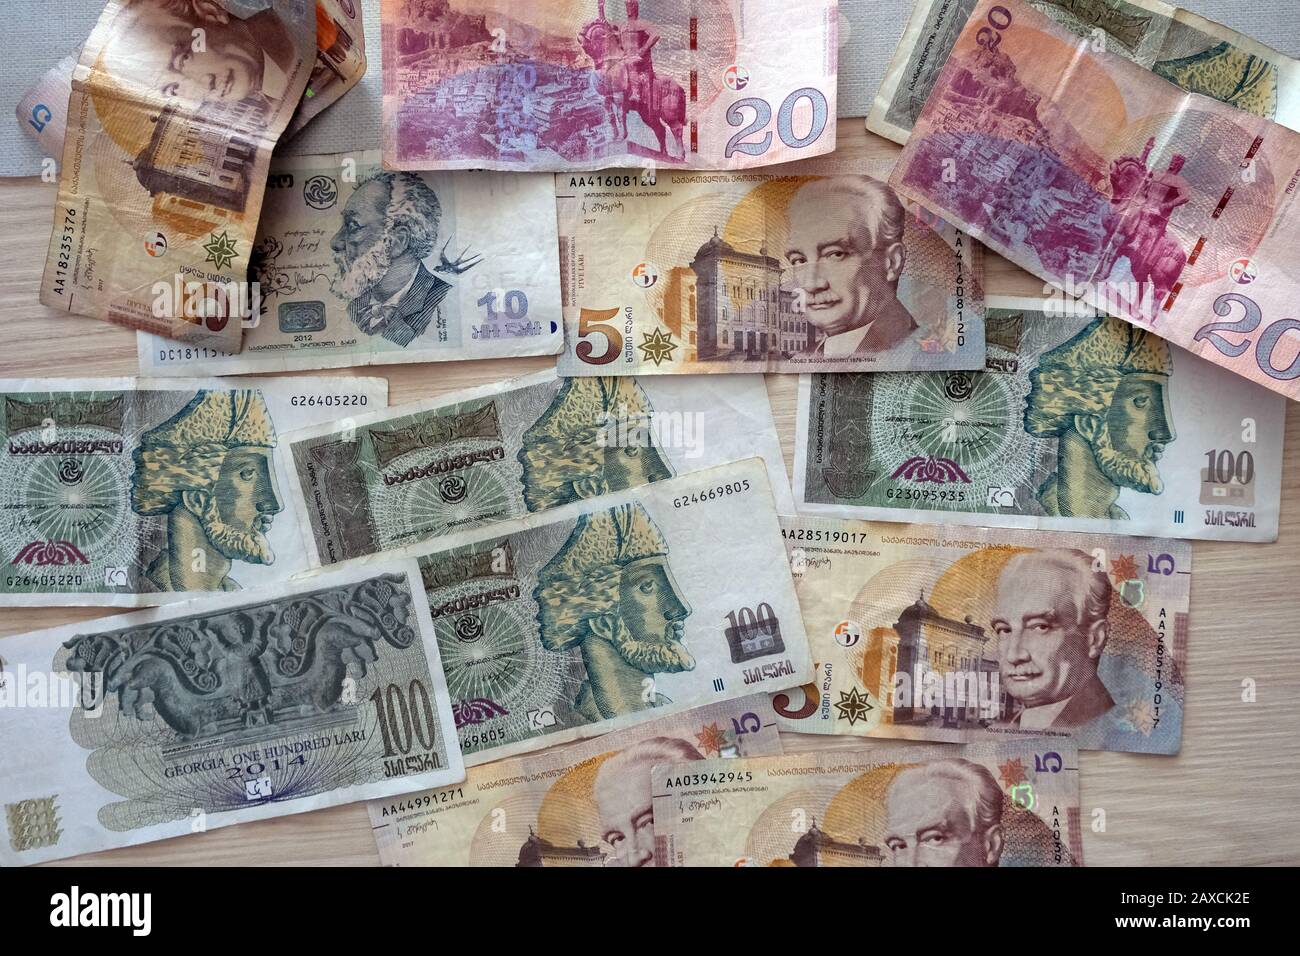 Georgian bills of different denominations on the table top view. Georgia paper money in 2020. Banknotes in denominations of 100, 10, 5 and 20 on a woo Stock Photo